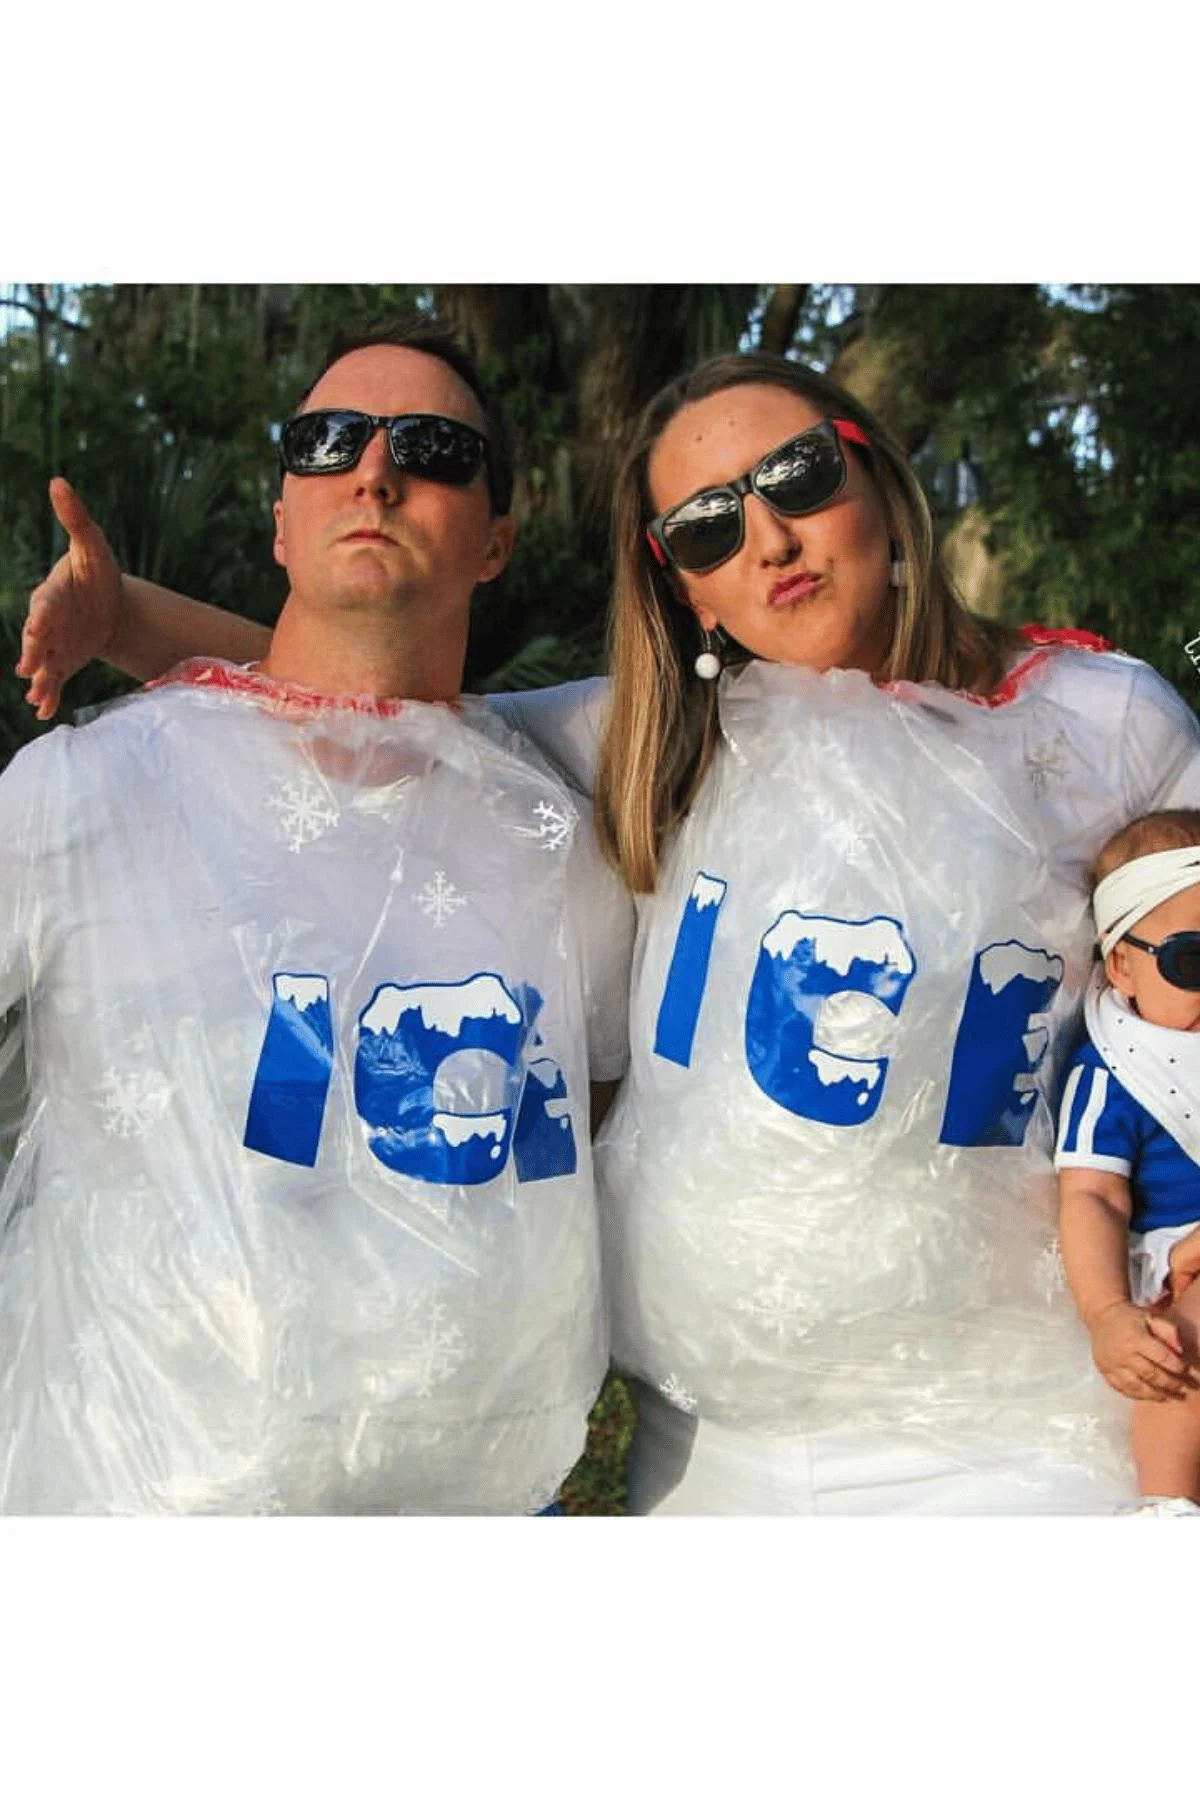 Mom and dad as bags of ice and baby as baby